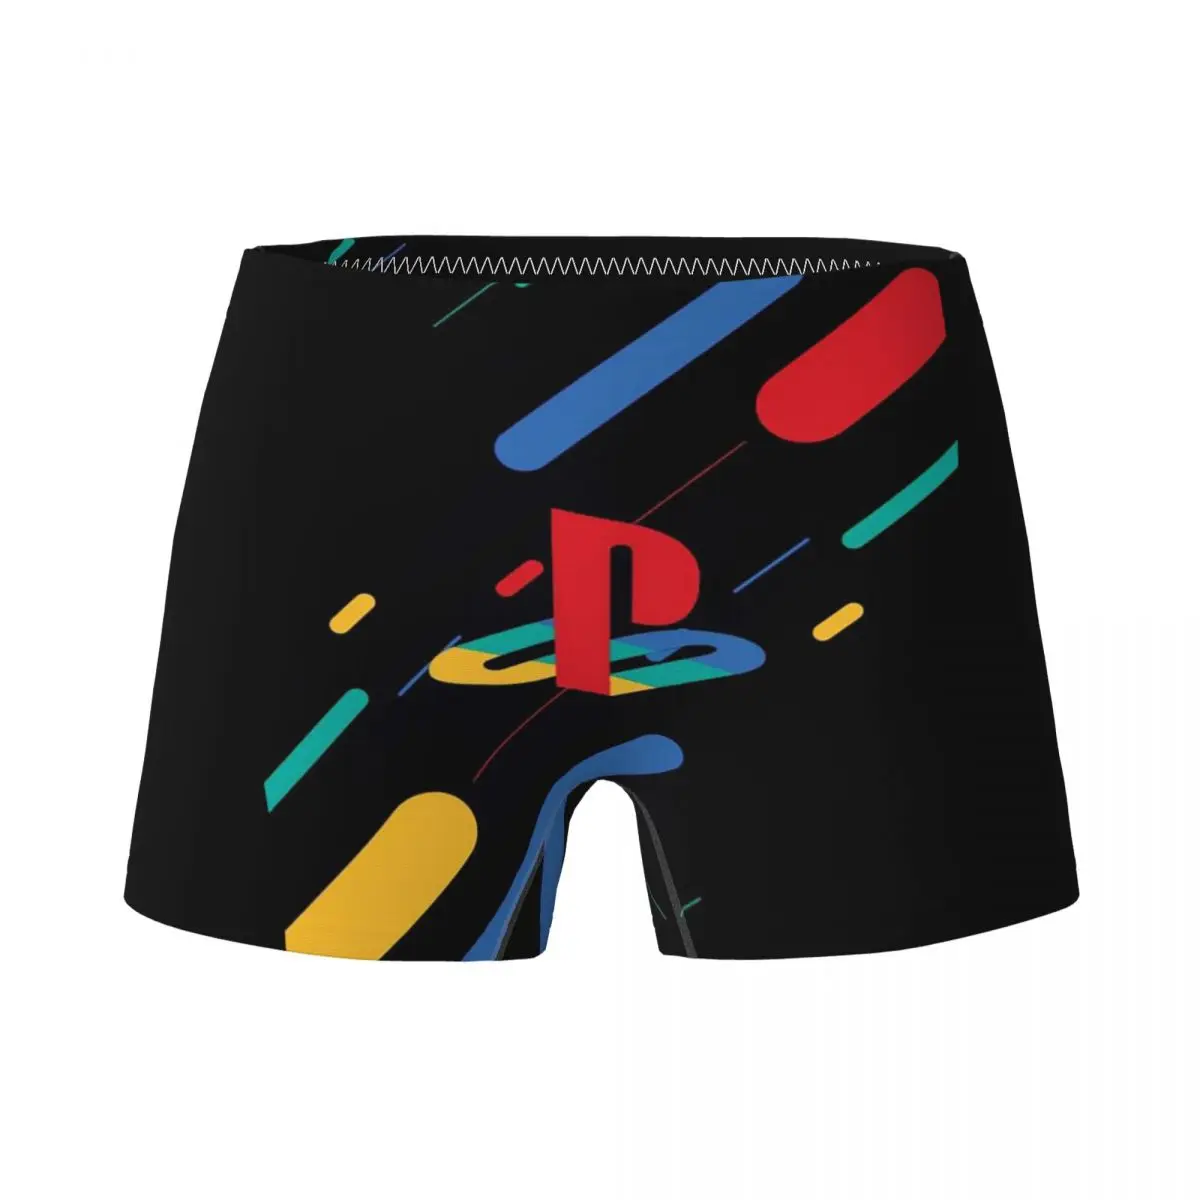 

Game Controler Ps Child Girls Underwear Kids Pretty Boxer Shorts Soft Cotton Teenage Panties Video Game Underpants For 4-15Y